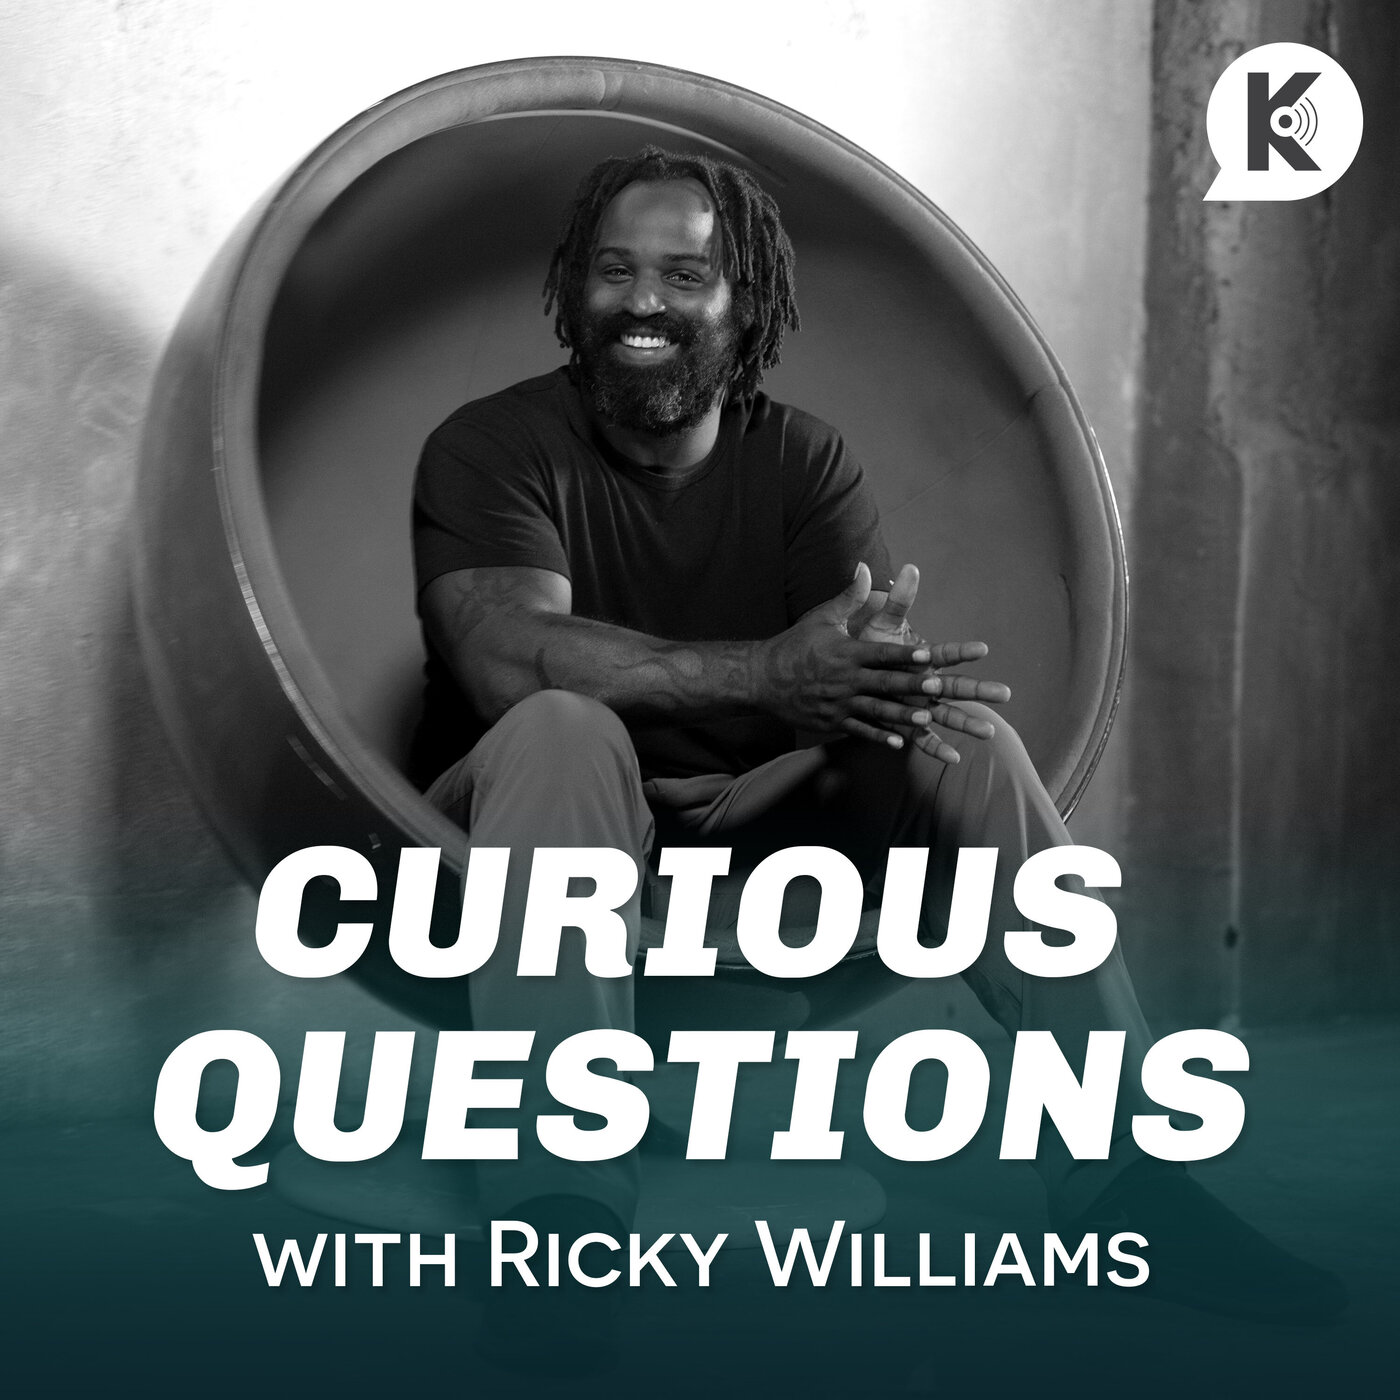 E14 Curious Questions with Ricky Williams | Ep. 14 | Dan Le Batard & Ricky Williams on Life's Wonder